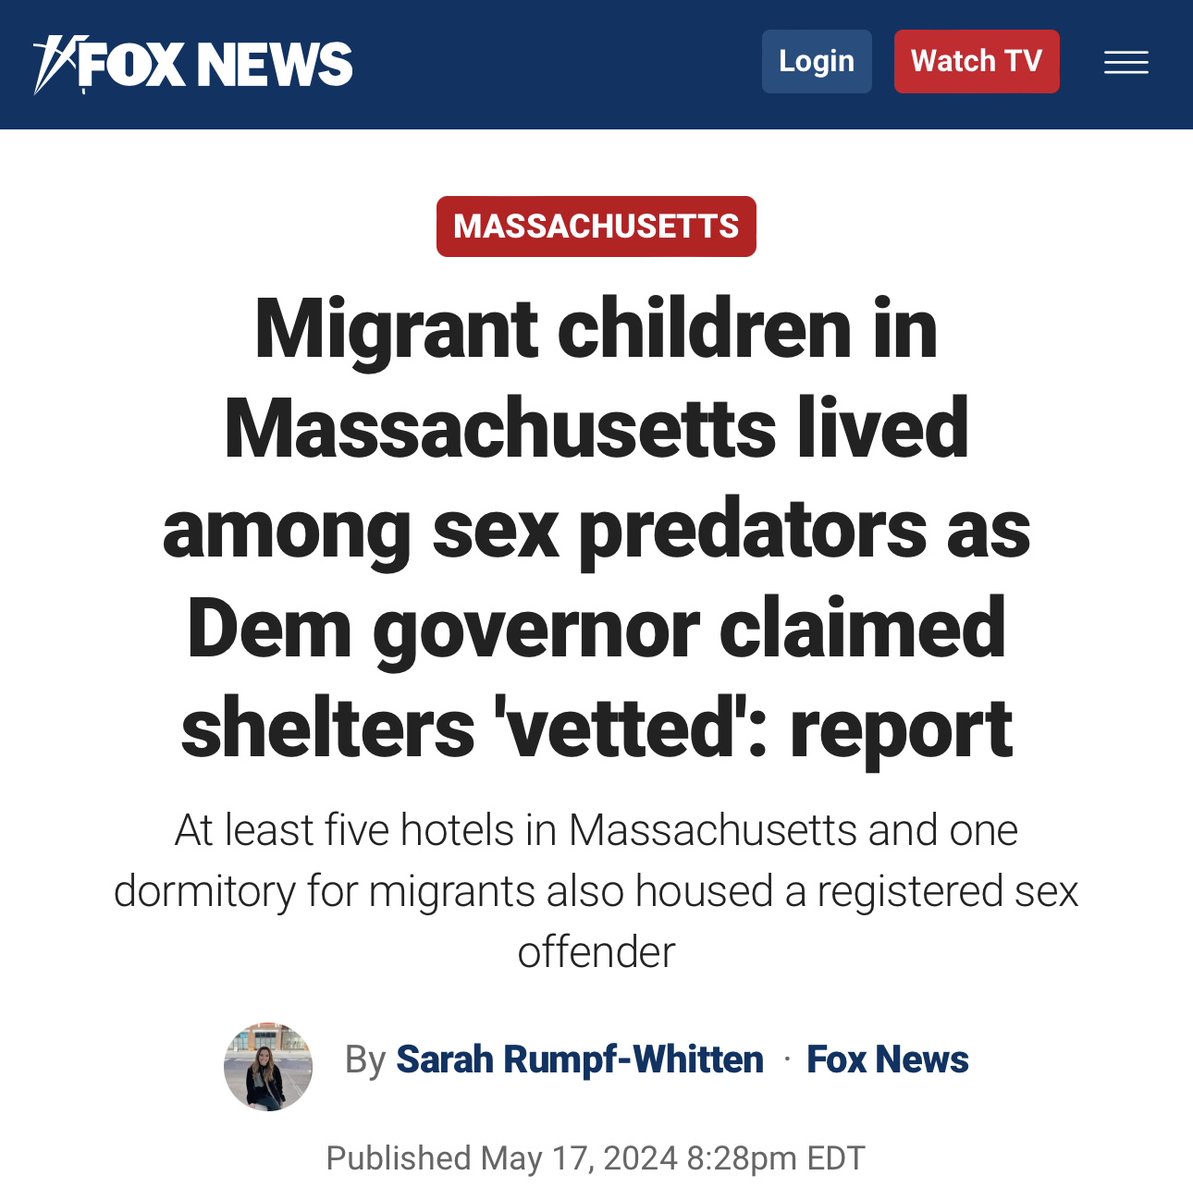 After a Haitian migrant r*ped a disabled girl in a housing facility, the Gov of MA (D) assured residents that everybody entering the migrant housing was thoroughly vetted. Turns out there’s multiple s*x offenders living with children. Massachusetts is an illegal haven because